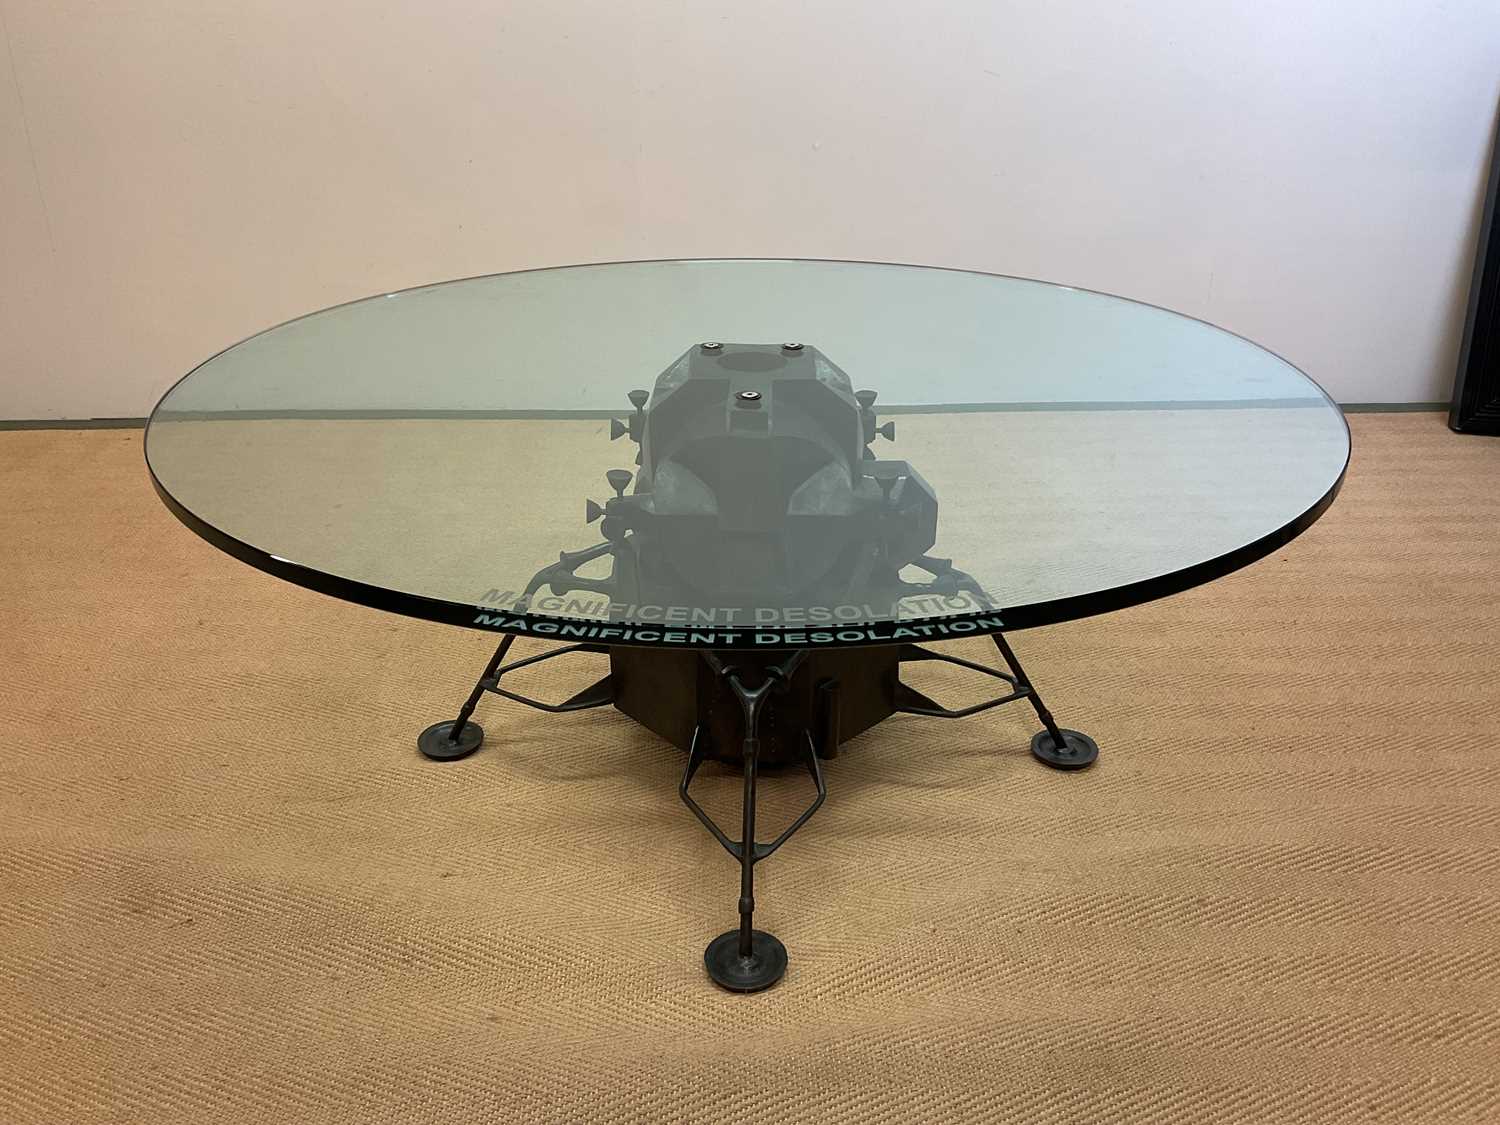 SIR PATRICK MOORE CBE HON FRS FRAS (1923-2012); a bronze 'Apollo' table by Mark Stoddart, with glass - Image 4 of 10